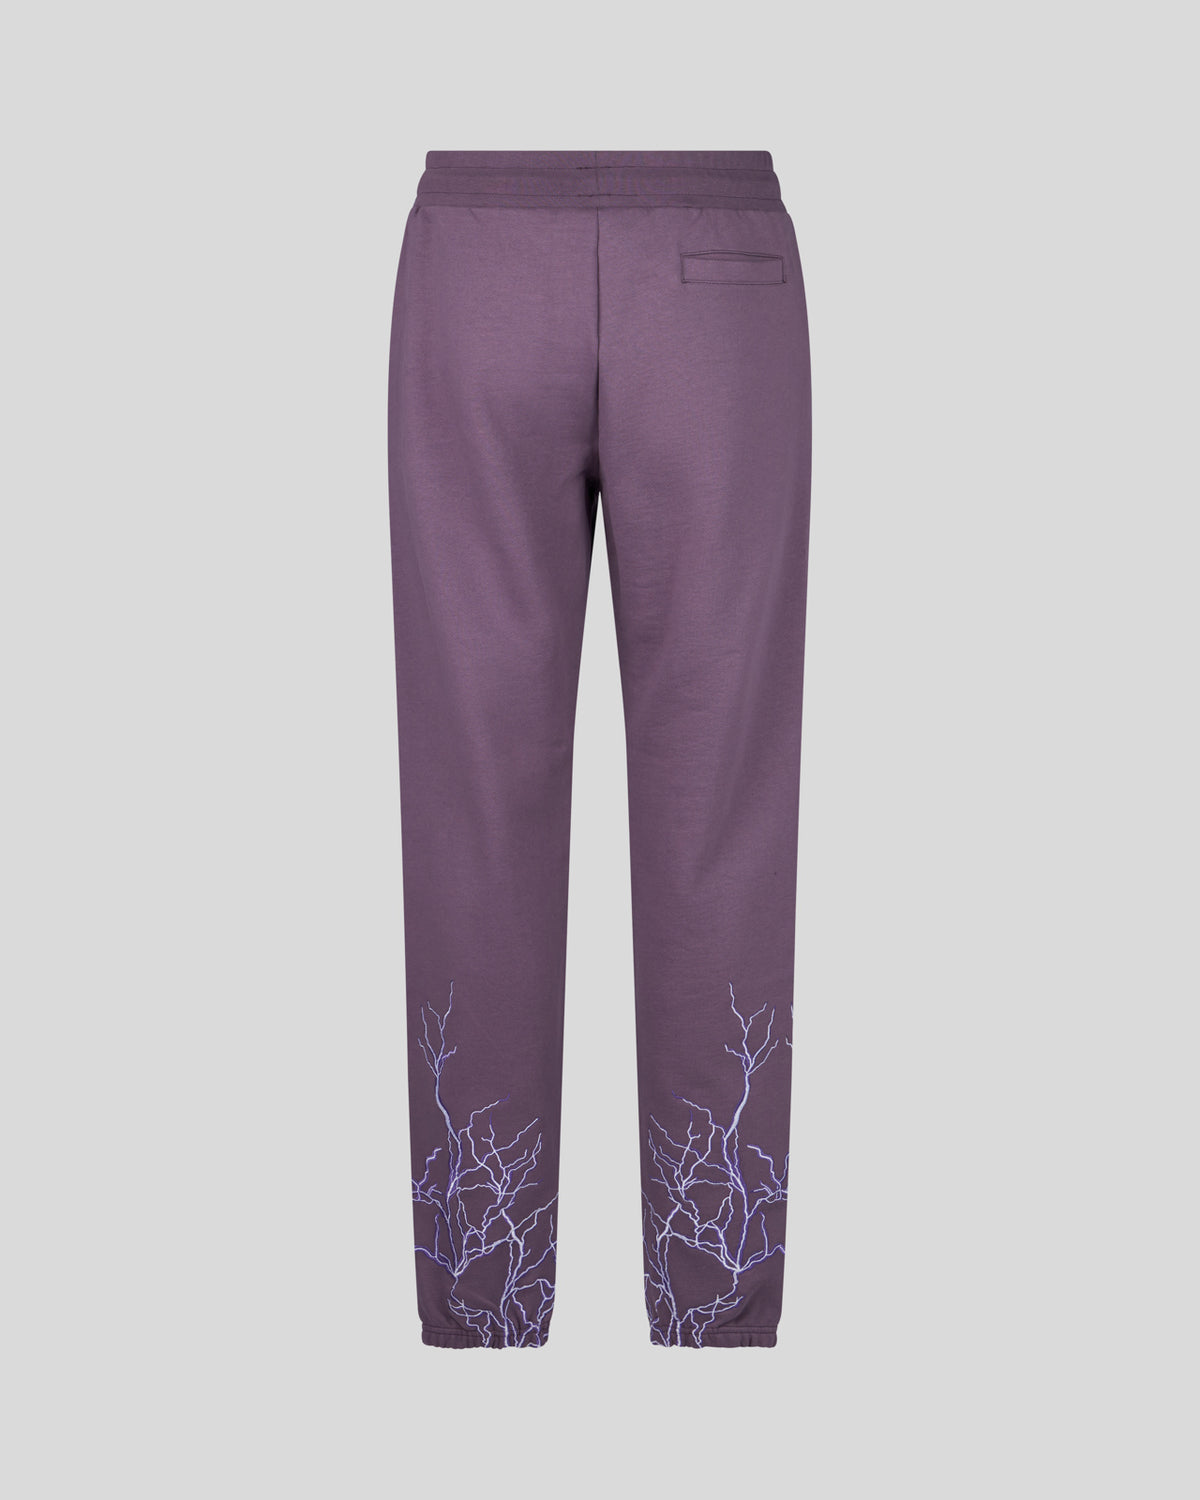 PHOBIA BLUE PANT WITH PURPLE EMBROIDERY LIGHTNING